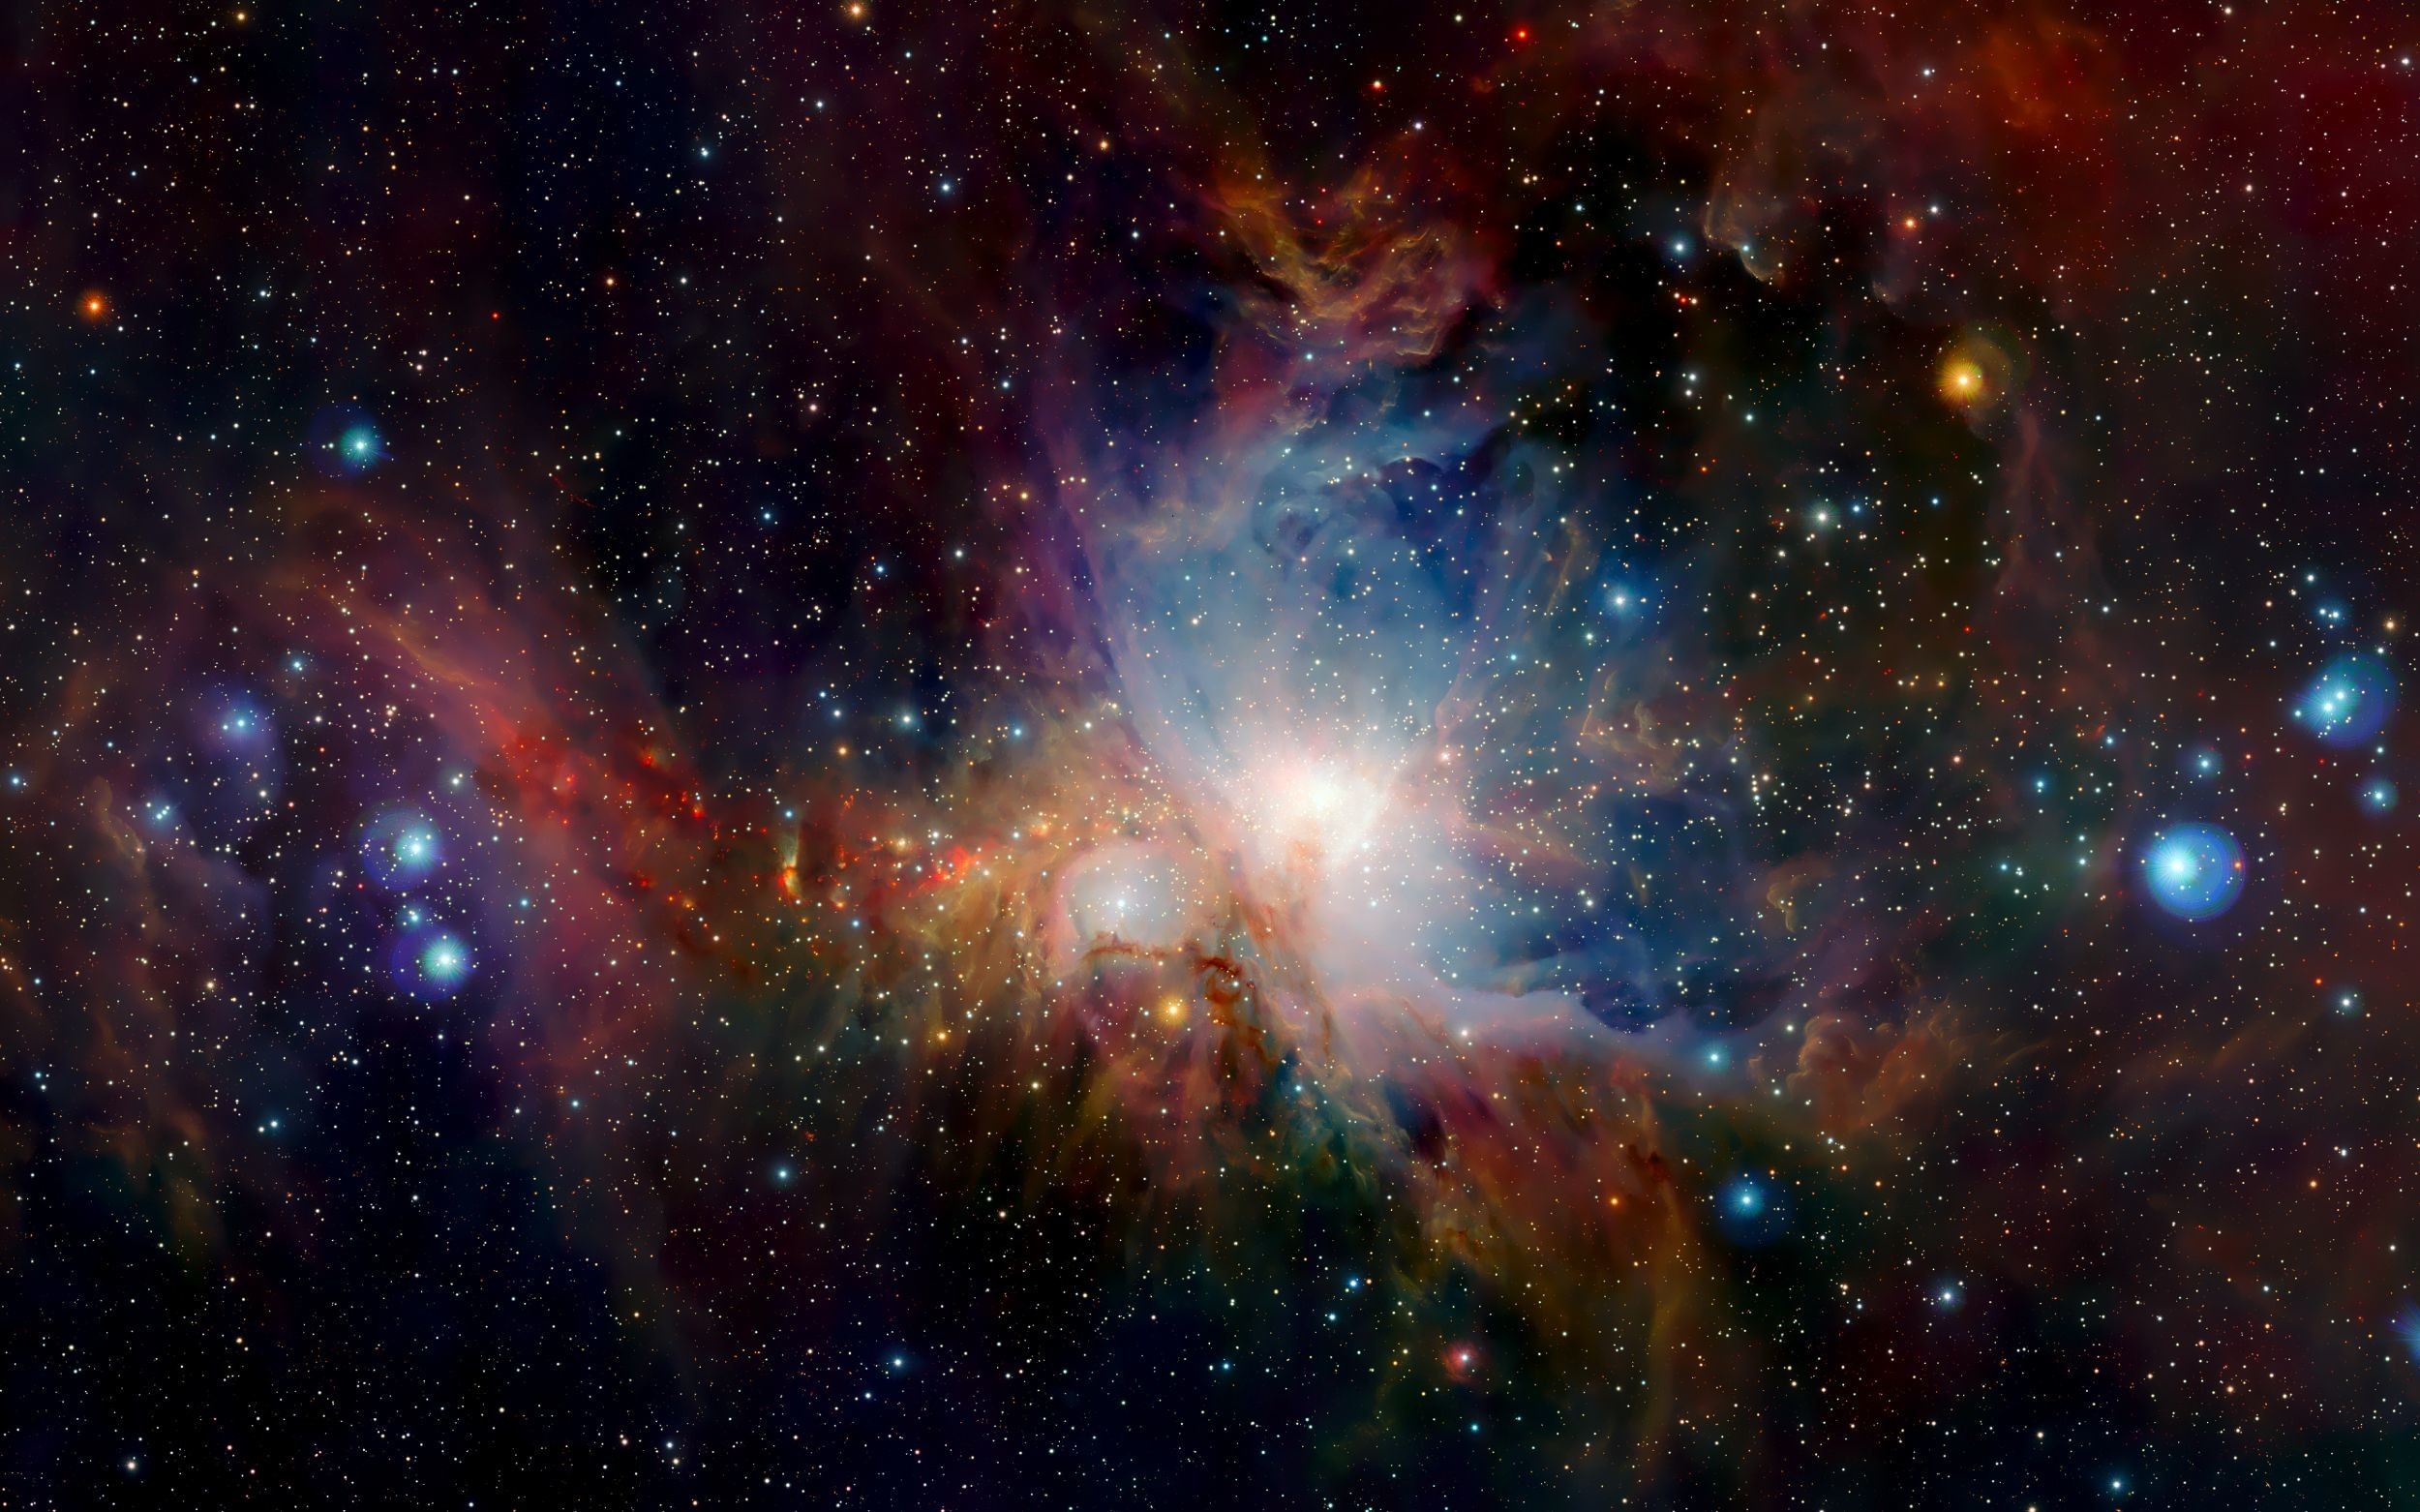 2500x1562  By Kasey Neilson: Galaxy Wallpapers for PC & Mac, Laptop, Tablet,